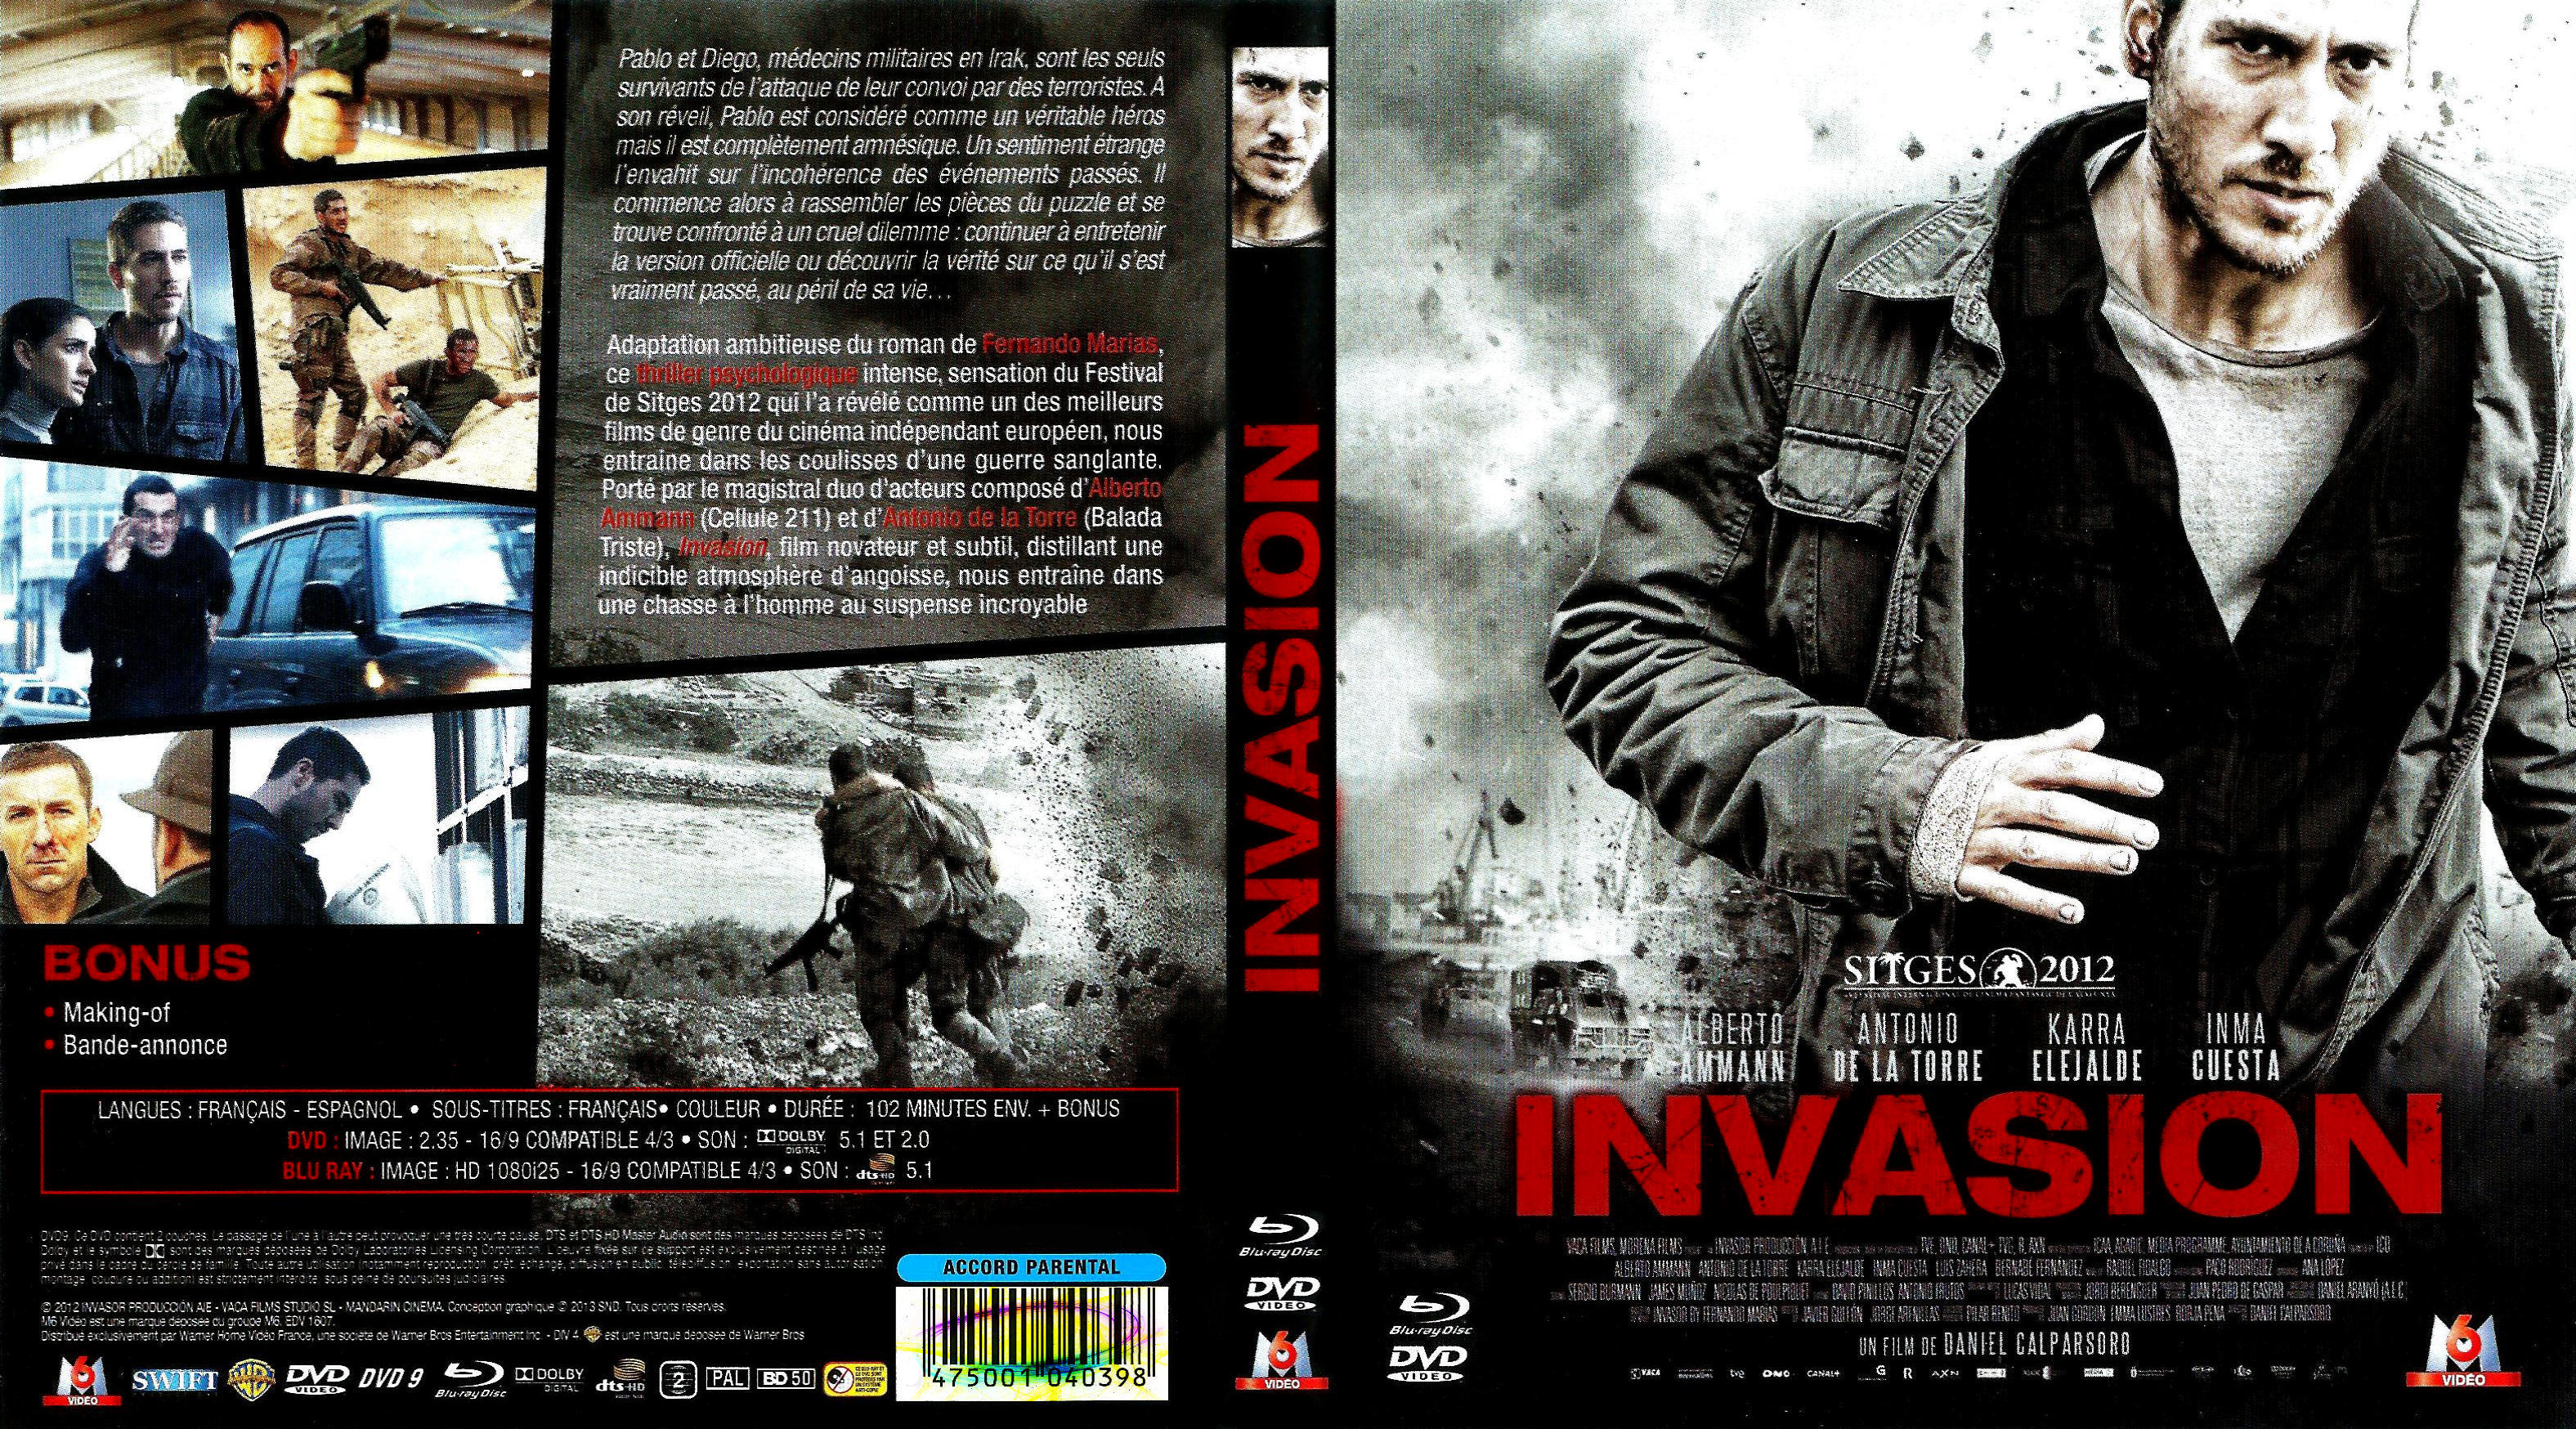 Jaquette DVD Invasion (2012) (BLU-RAY)